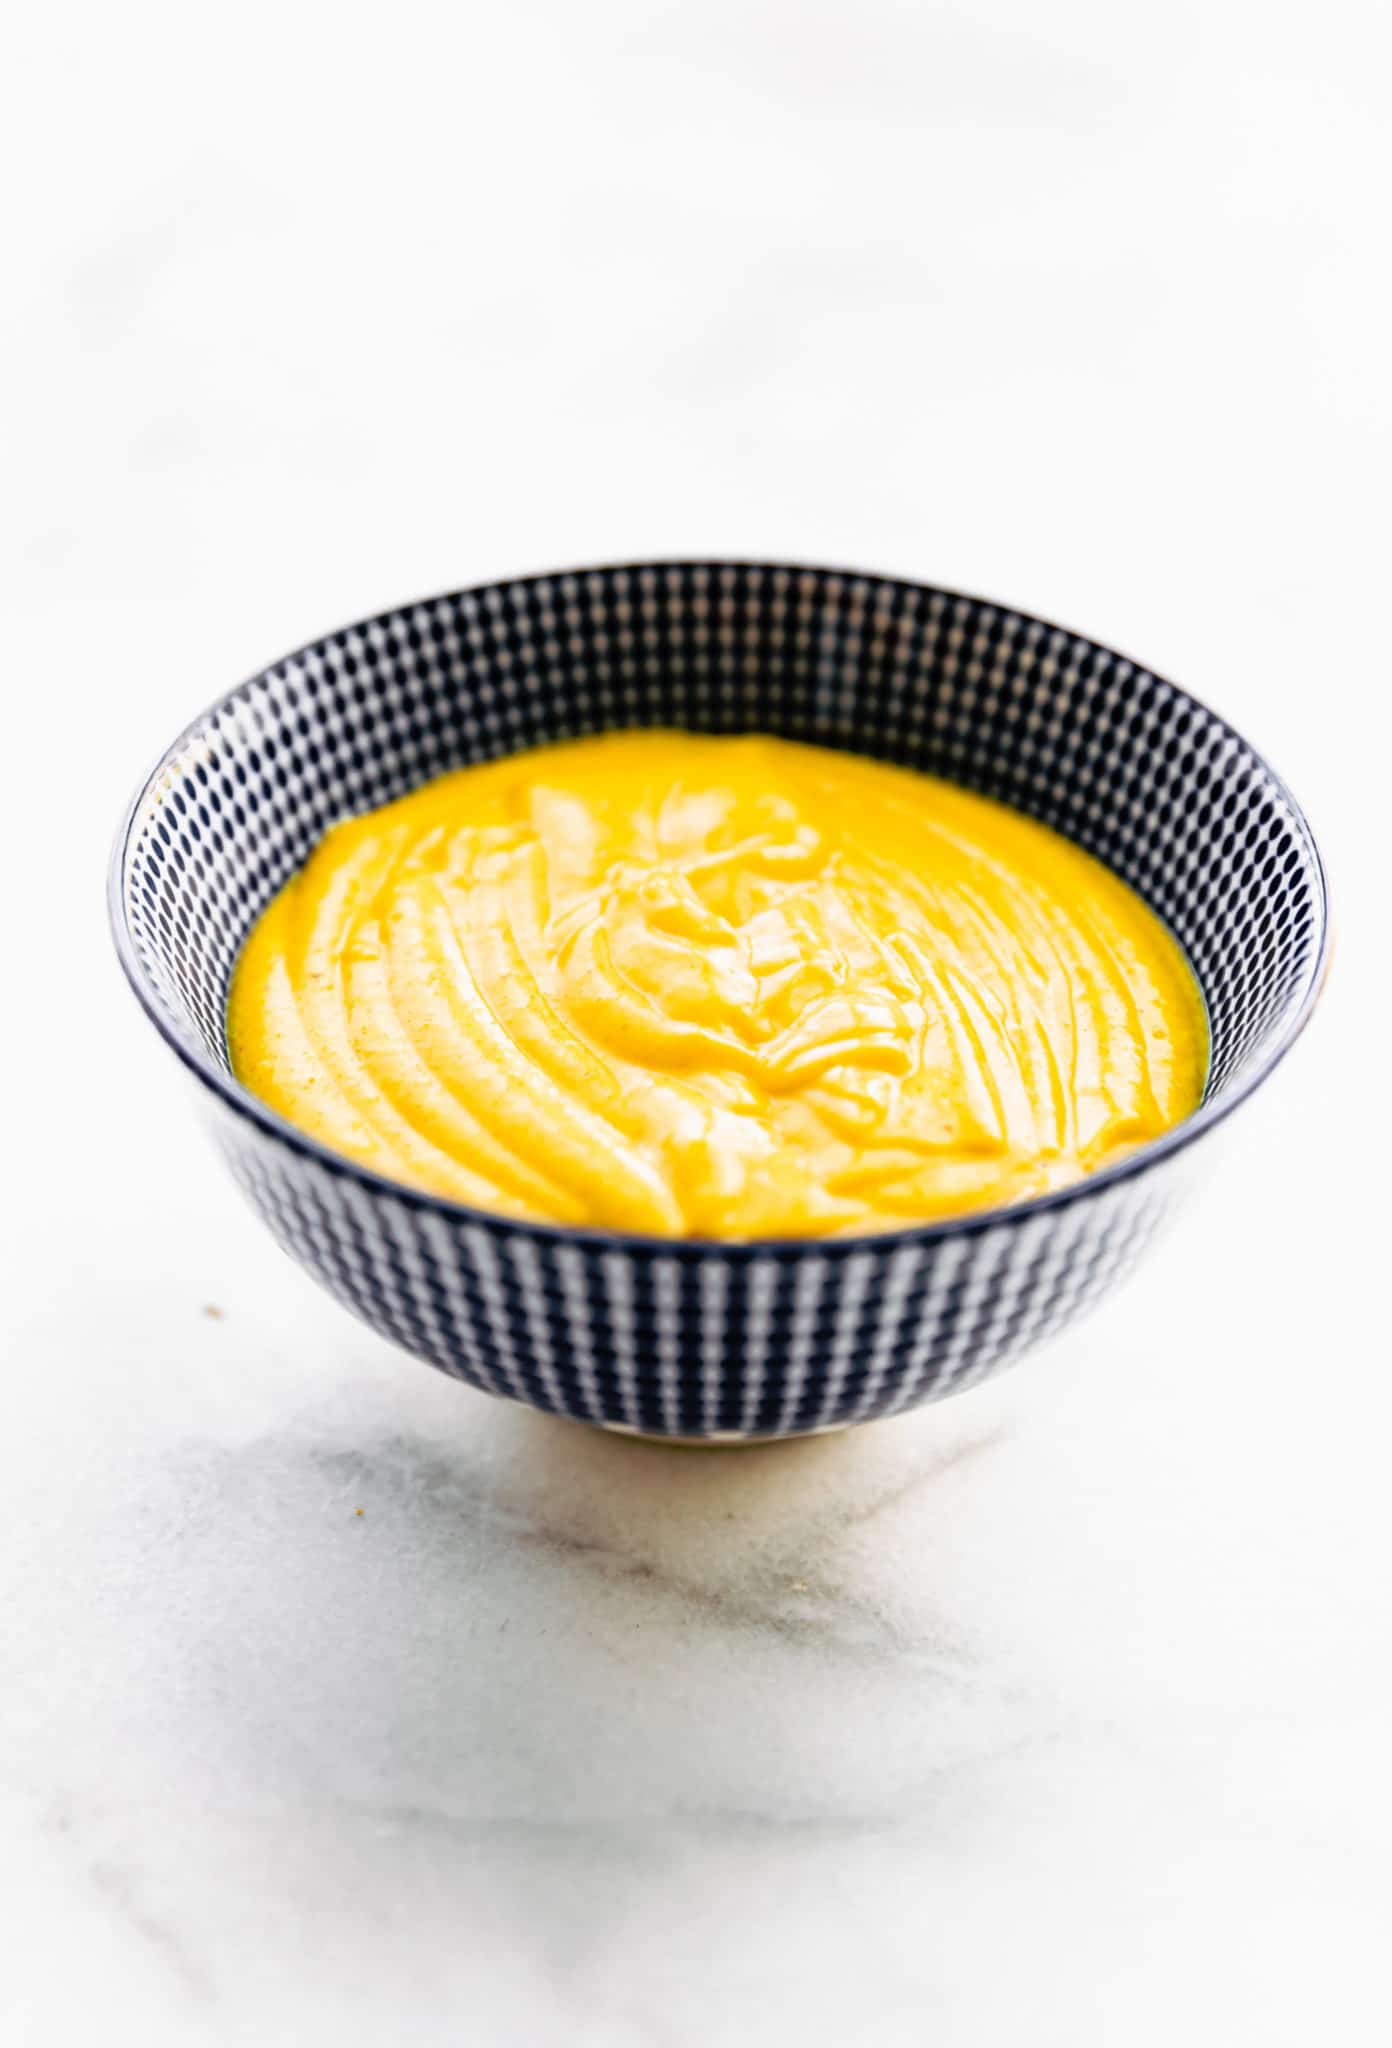 Vegan cheese sauce in a blue bowl on a white tabletop